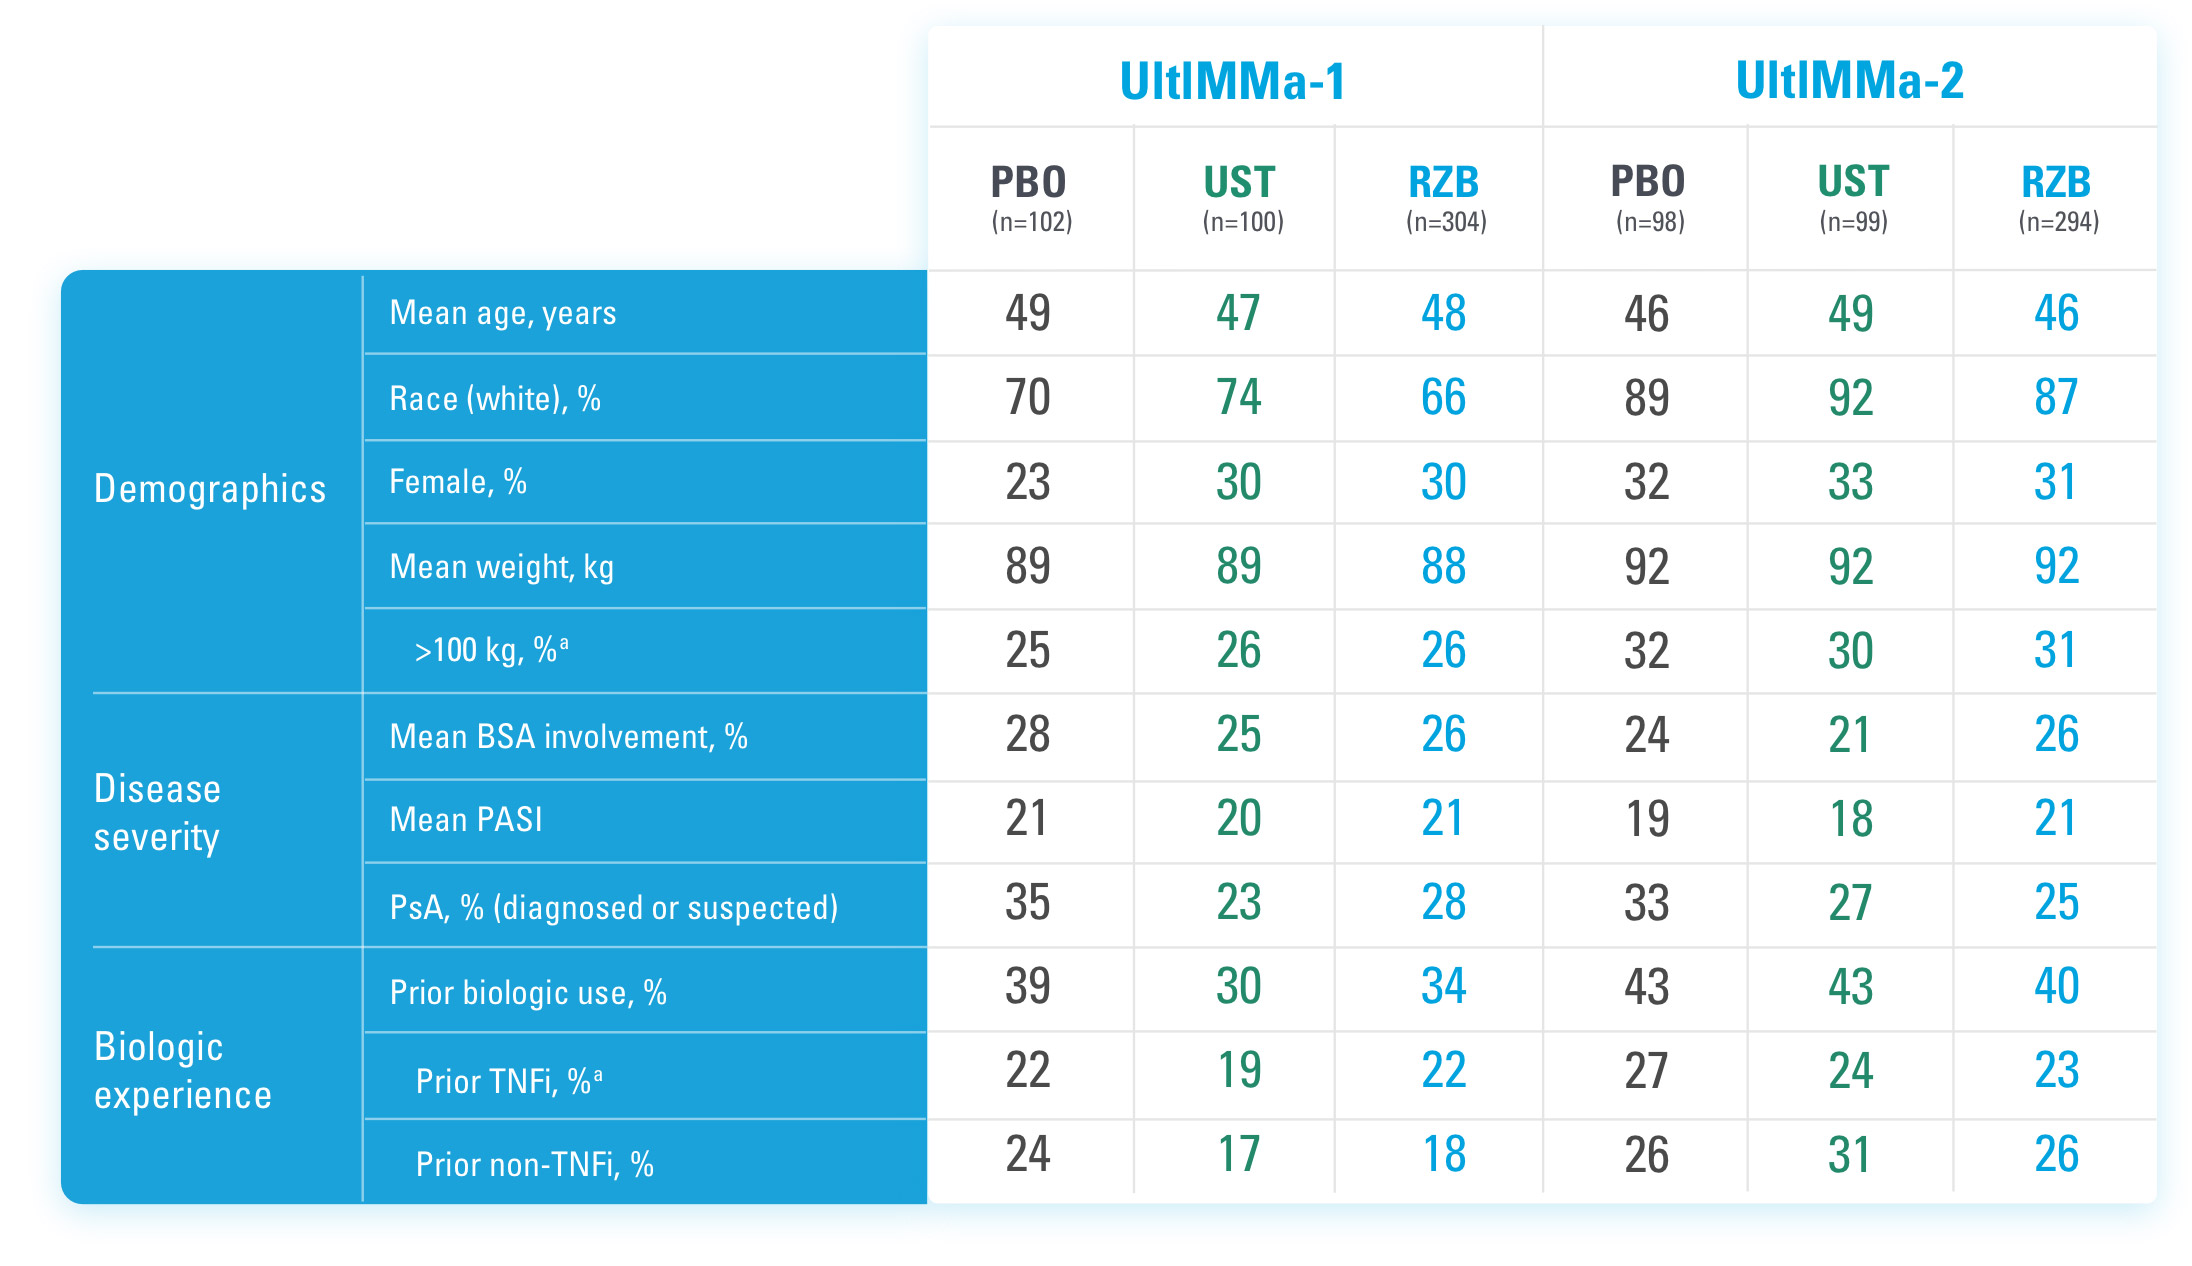 SELECTED BASELINE CHARACTERISTICS - UltIMMa-1 and UltIMMa-2.